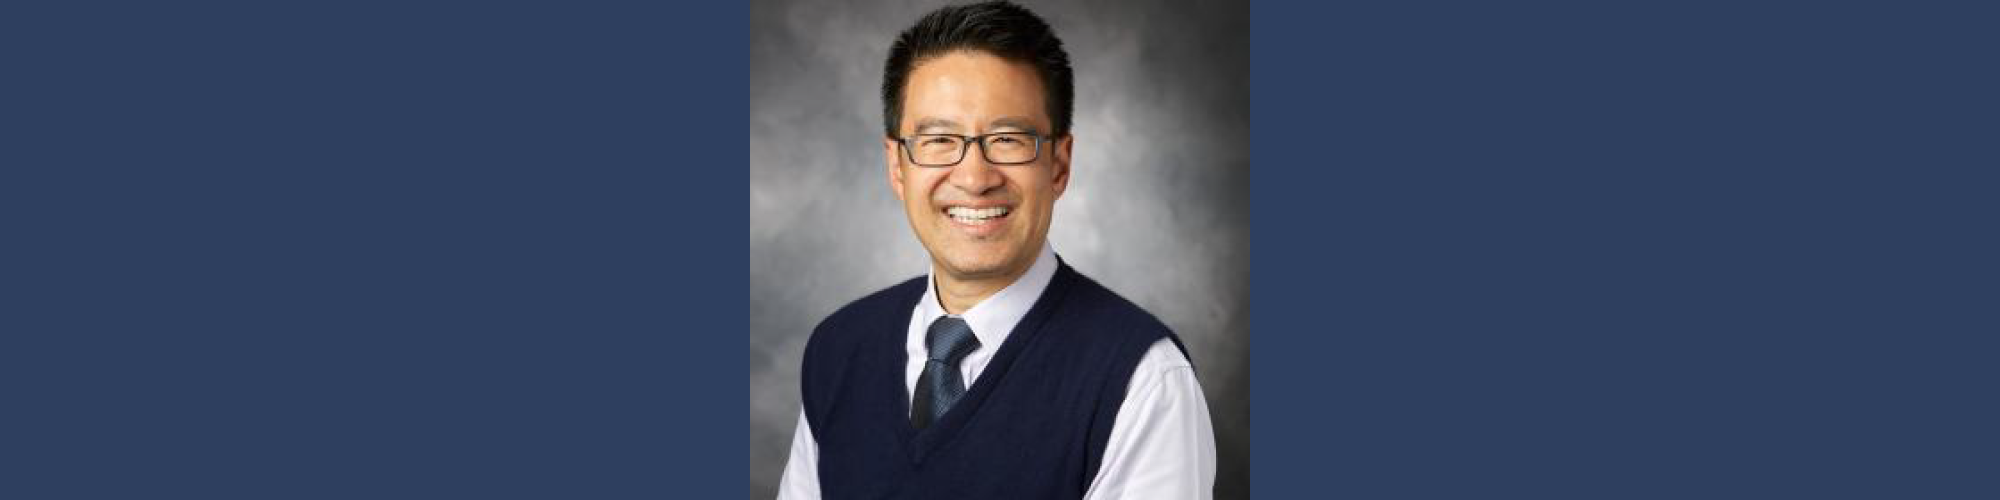 St. Anthony’s Medical Clinic Welcomes New Chief Medical Officer, Dr. Larry Kwan, Assistant Professor, Medicine, Primary Care and Population Health, Stanford Health Care 